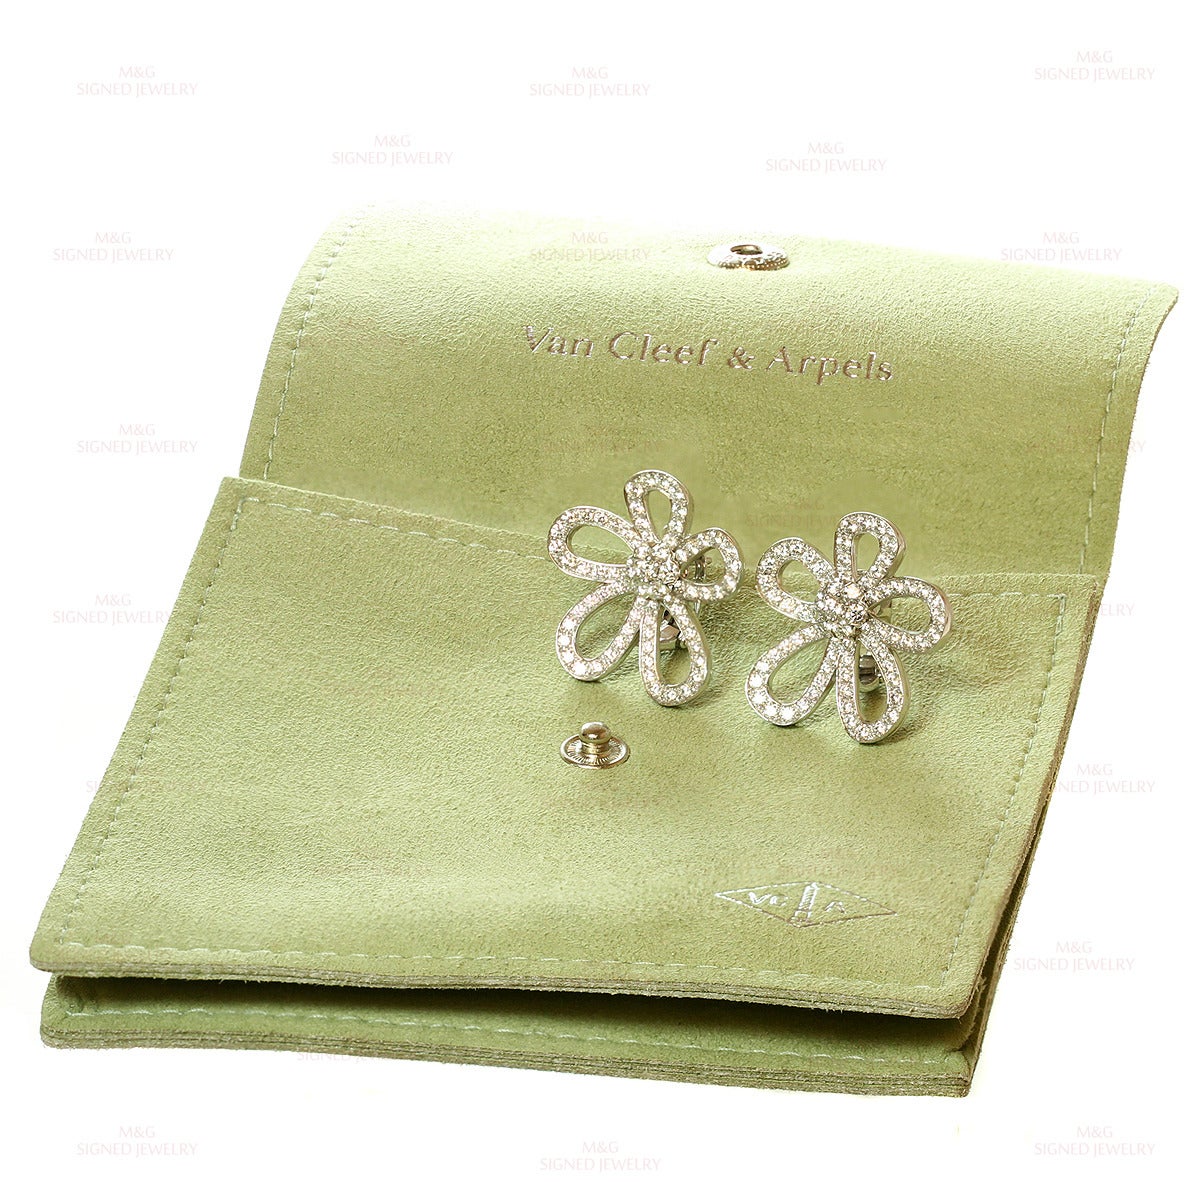 These splendid modern Van Cleef & Arpels flowerlace earrings are centered around a sparkling Fleurette motif surrounded by gently curved diamond petals. Crafted in 18k yellow gold and set with an estimated 3.90 carats of brilliant-cut round E-F